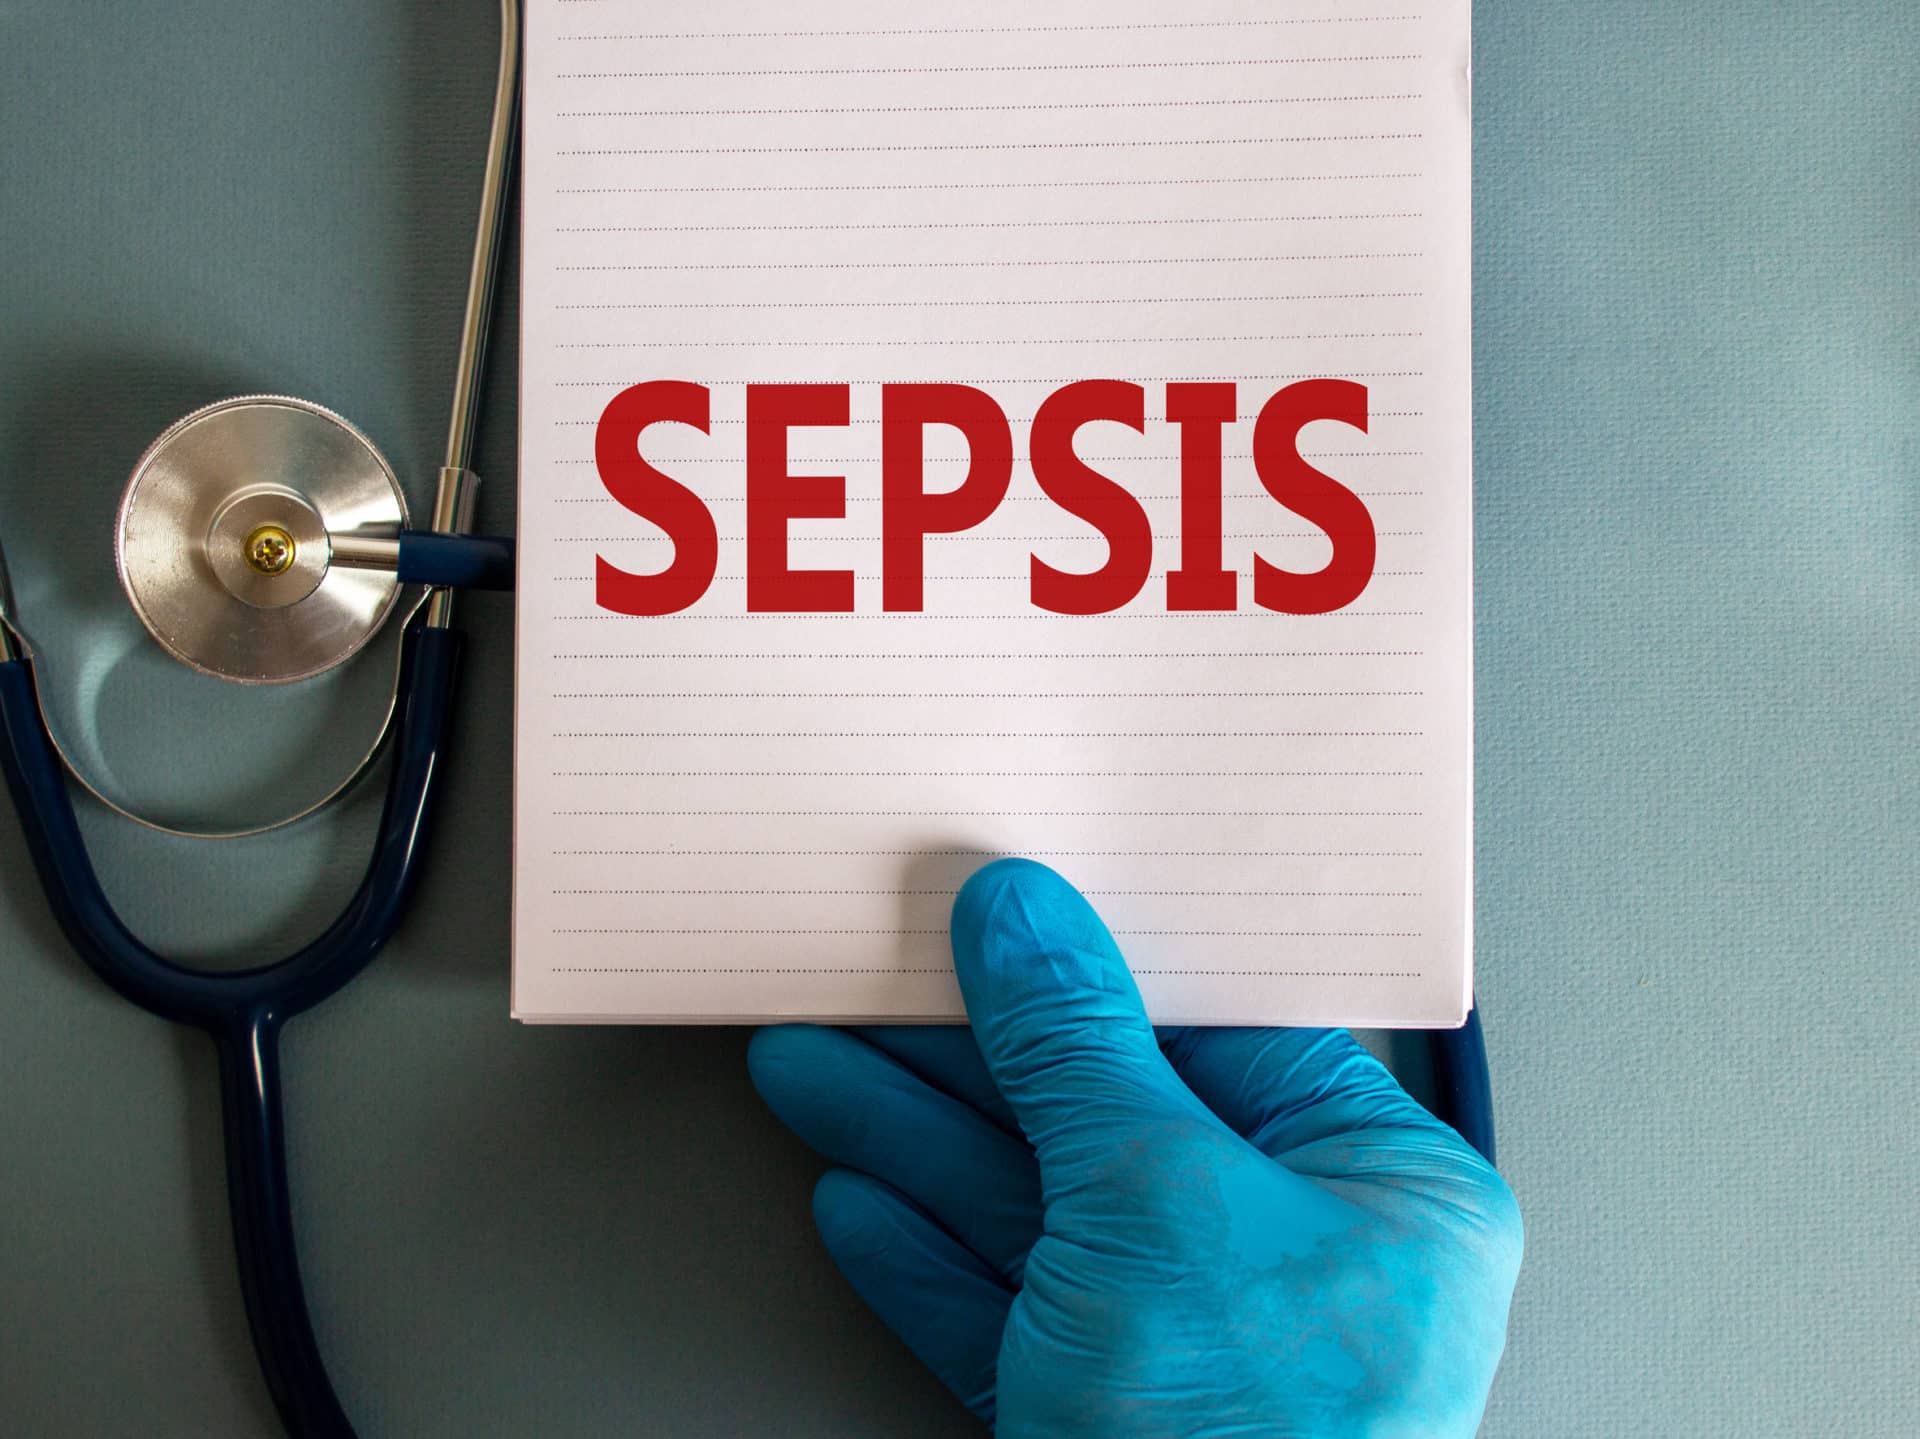 Statistics Show No New Yorker Should Suffer from Sepsis